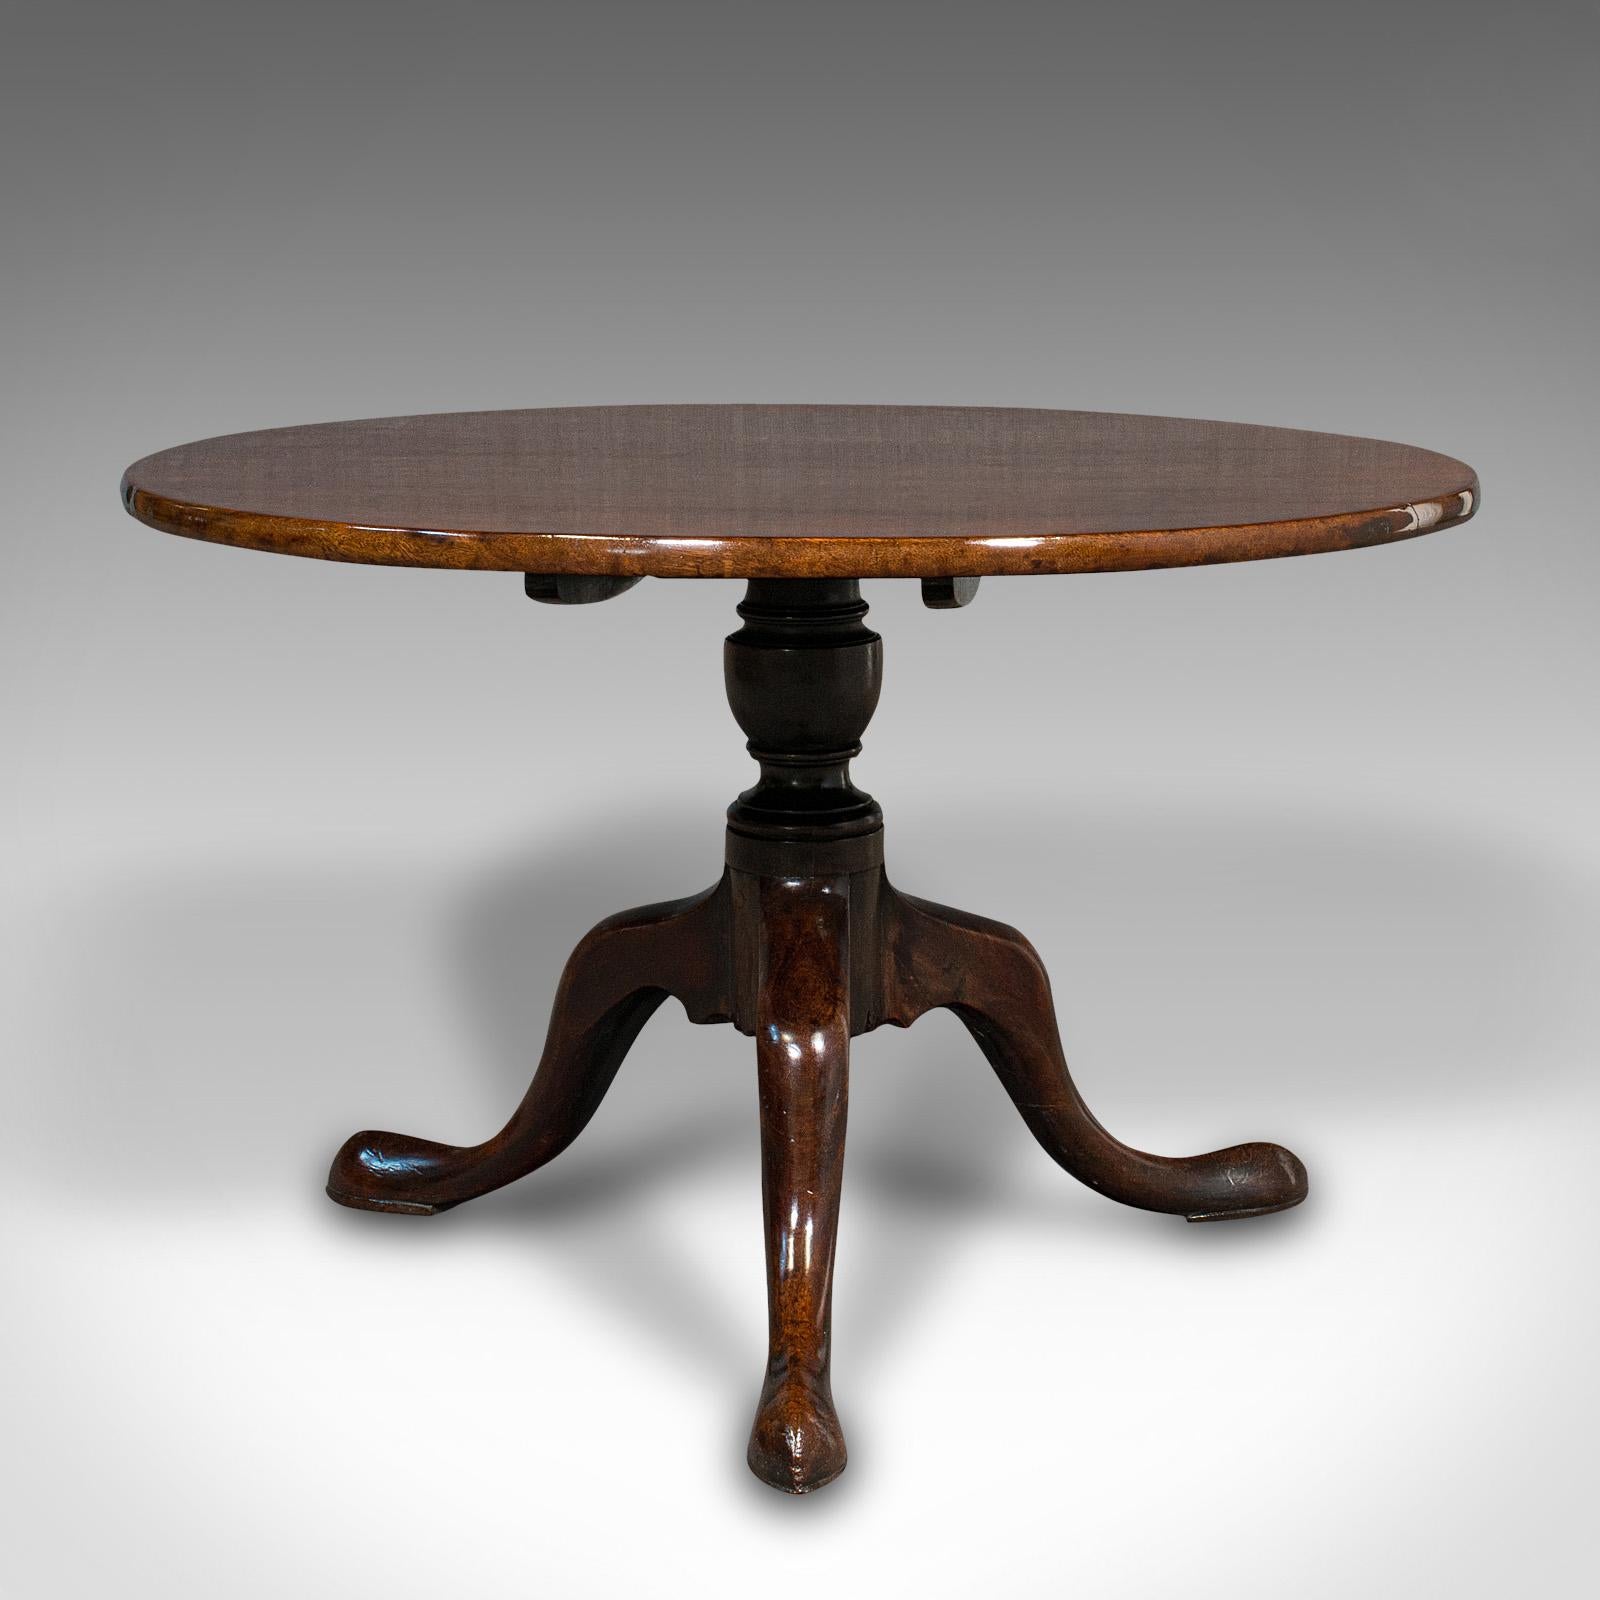 Antique Tilt Top Table, English, Wine, Afternoon Tea, Early Georgian, Circa 1750 In Good Condition For Sale In Hele, Devon, GB